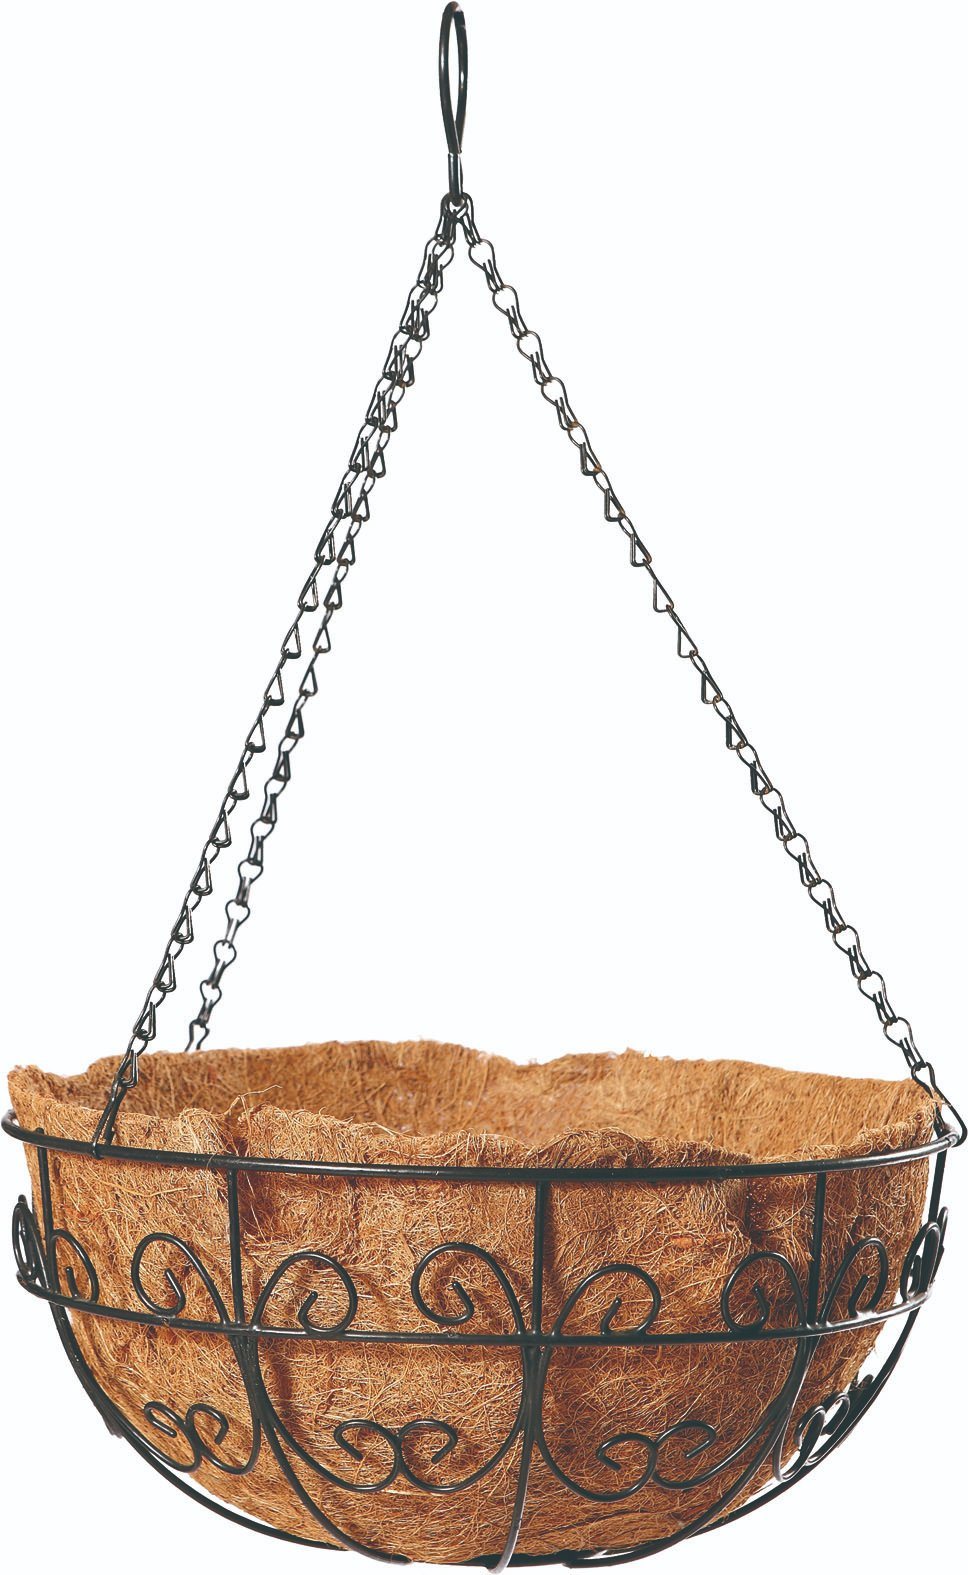 Metal Flower Planter Iron Wire Hanging Basket with Coco Liner and Chain (3 sizes)